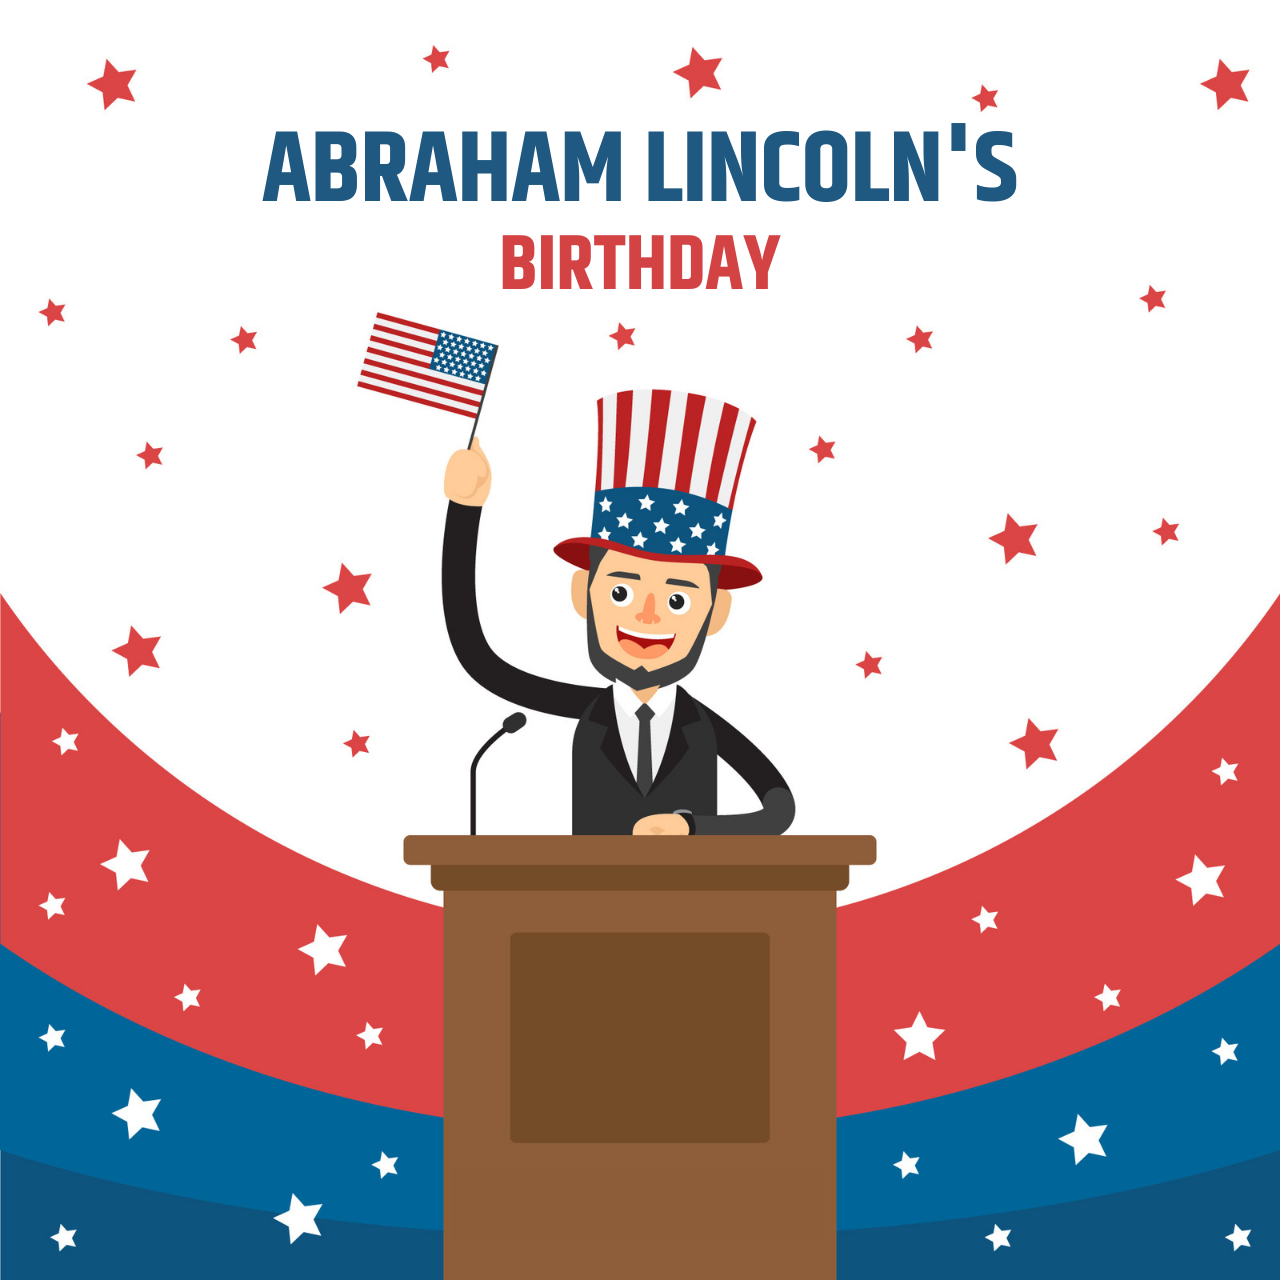 Abraham Lincoln Birthday 2022: Top 10 Quotes from the 16th U.S. President